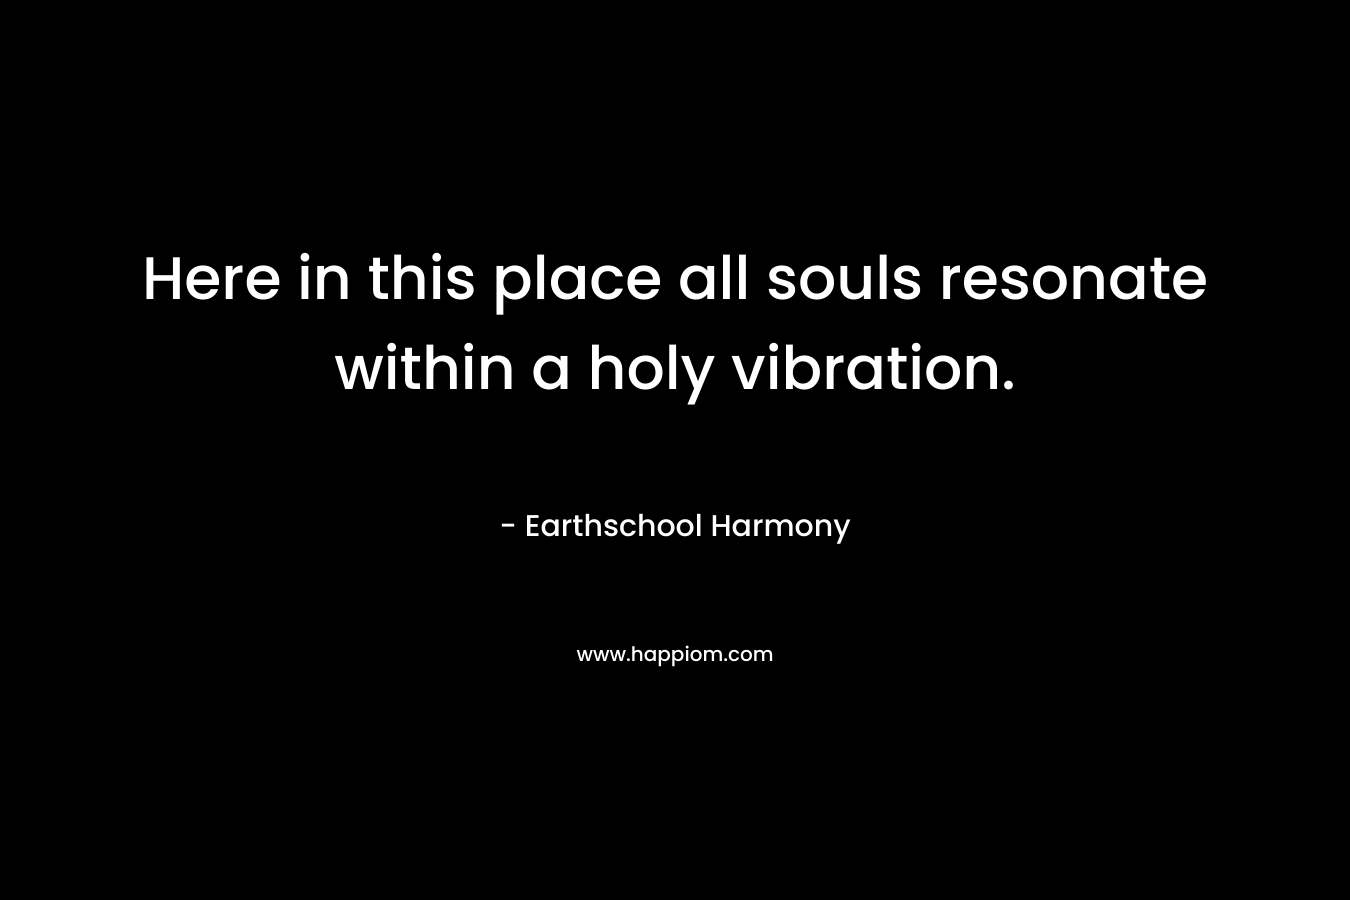 Here in this place all souls resonate within a holy vibration.